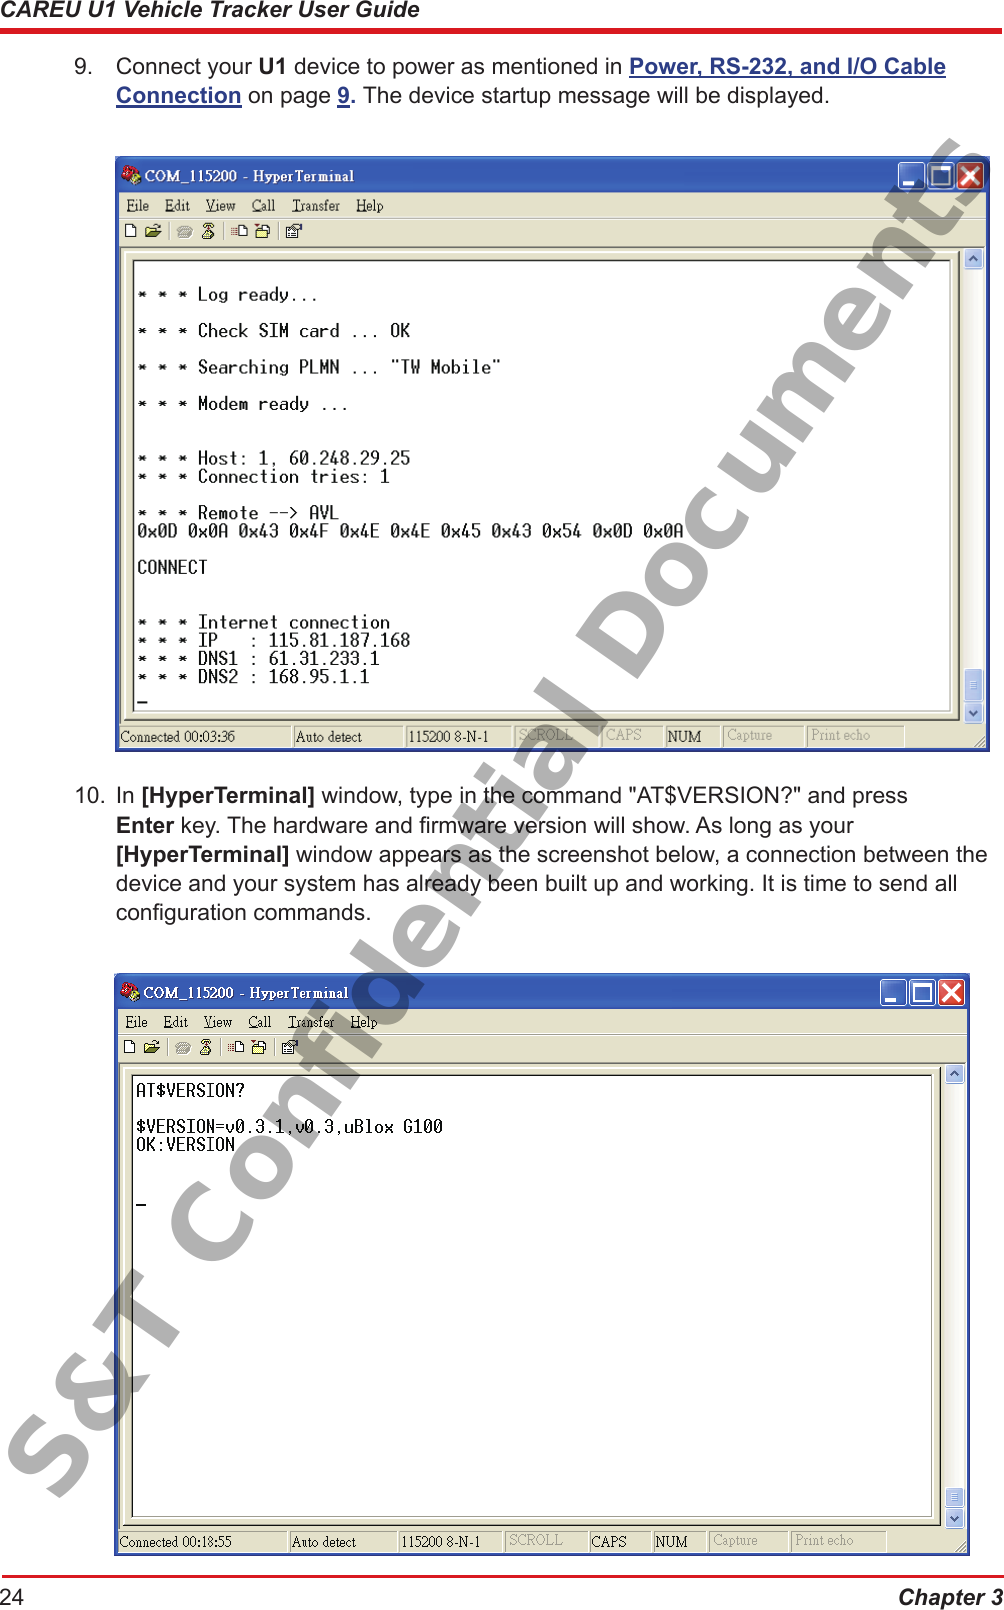 Chapter 324CAREU U1 Vehicle Tracker User Guide9.  Connect your U1 device to power as mentioned in Power, RS-232, and I/O Cable     Connection on page 9. The device startup message will be displayed.10.  In [HyperTerminal] window, type in the command &quot;AT$VERSION?&quot; and press     Enter key. The hardware and rmware version will show. As long as your       [HyperTerminal] window appears as the screenshot below, a connection between the    device and your system has already been built up and working. It is time to send all      conguration commands.S&amp;T Confidential Documents